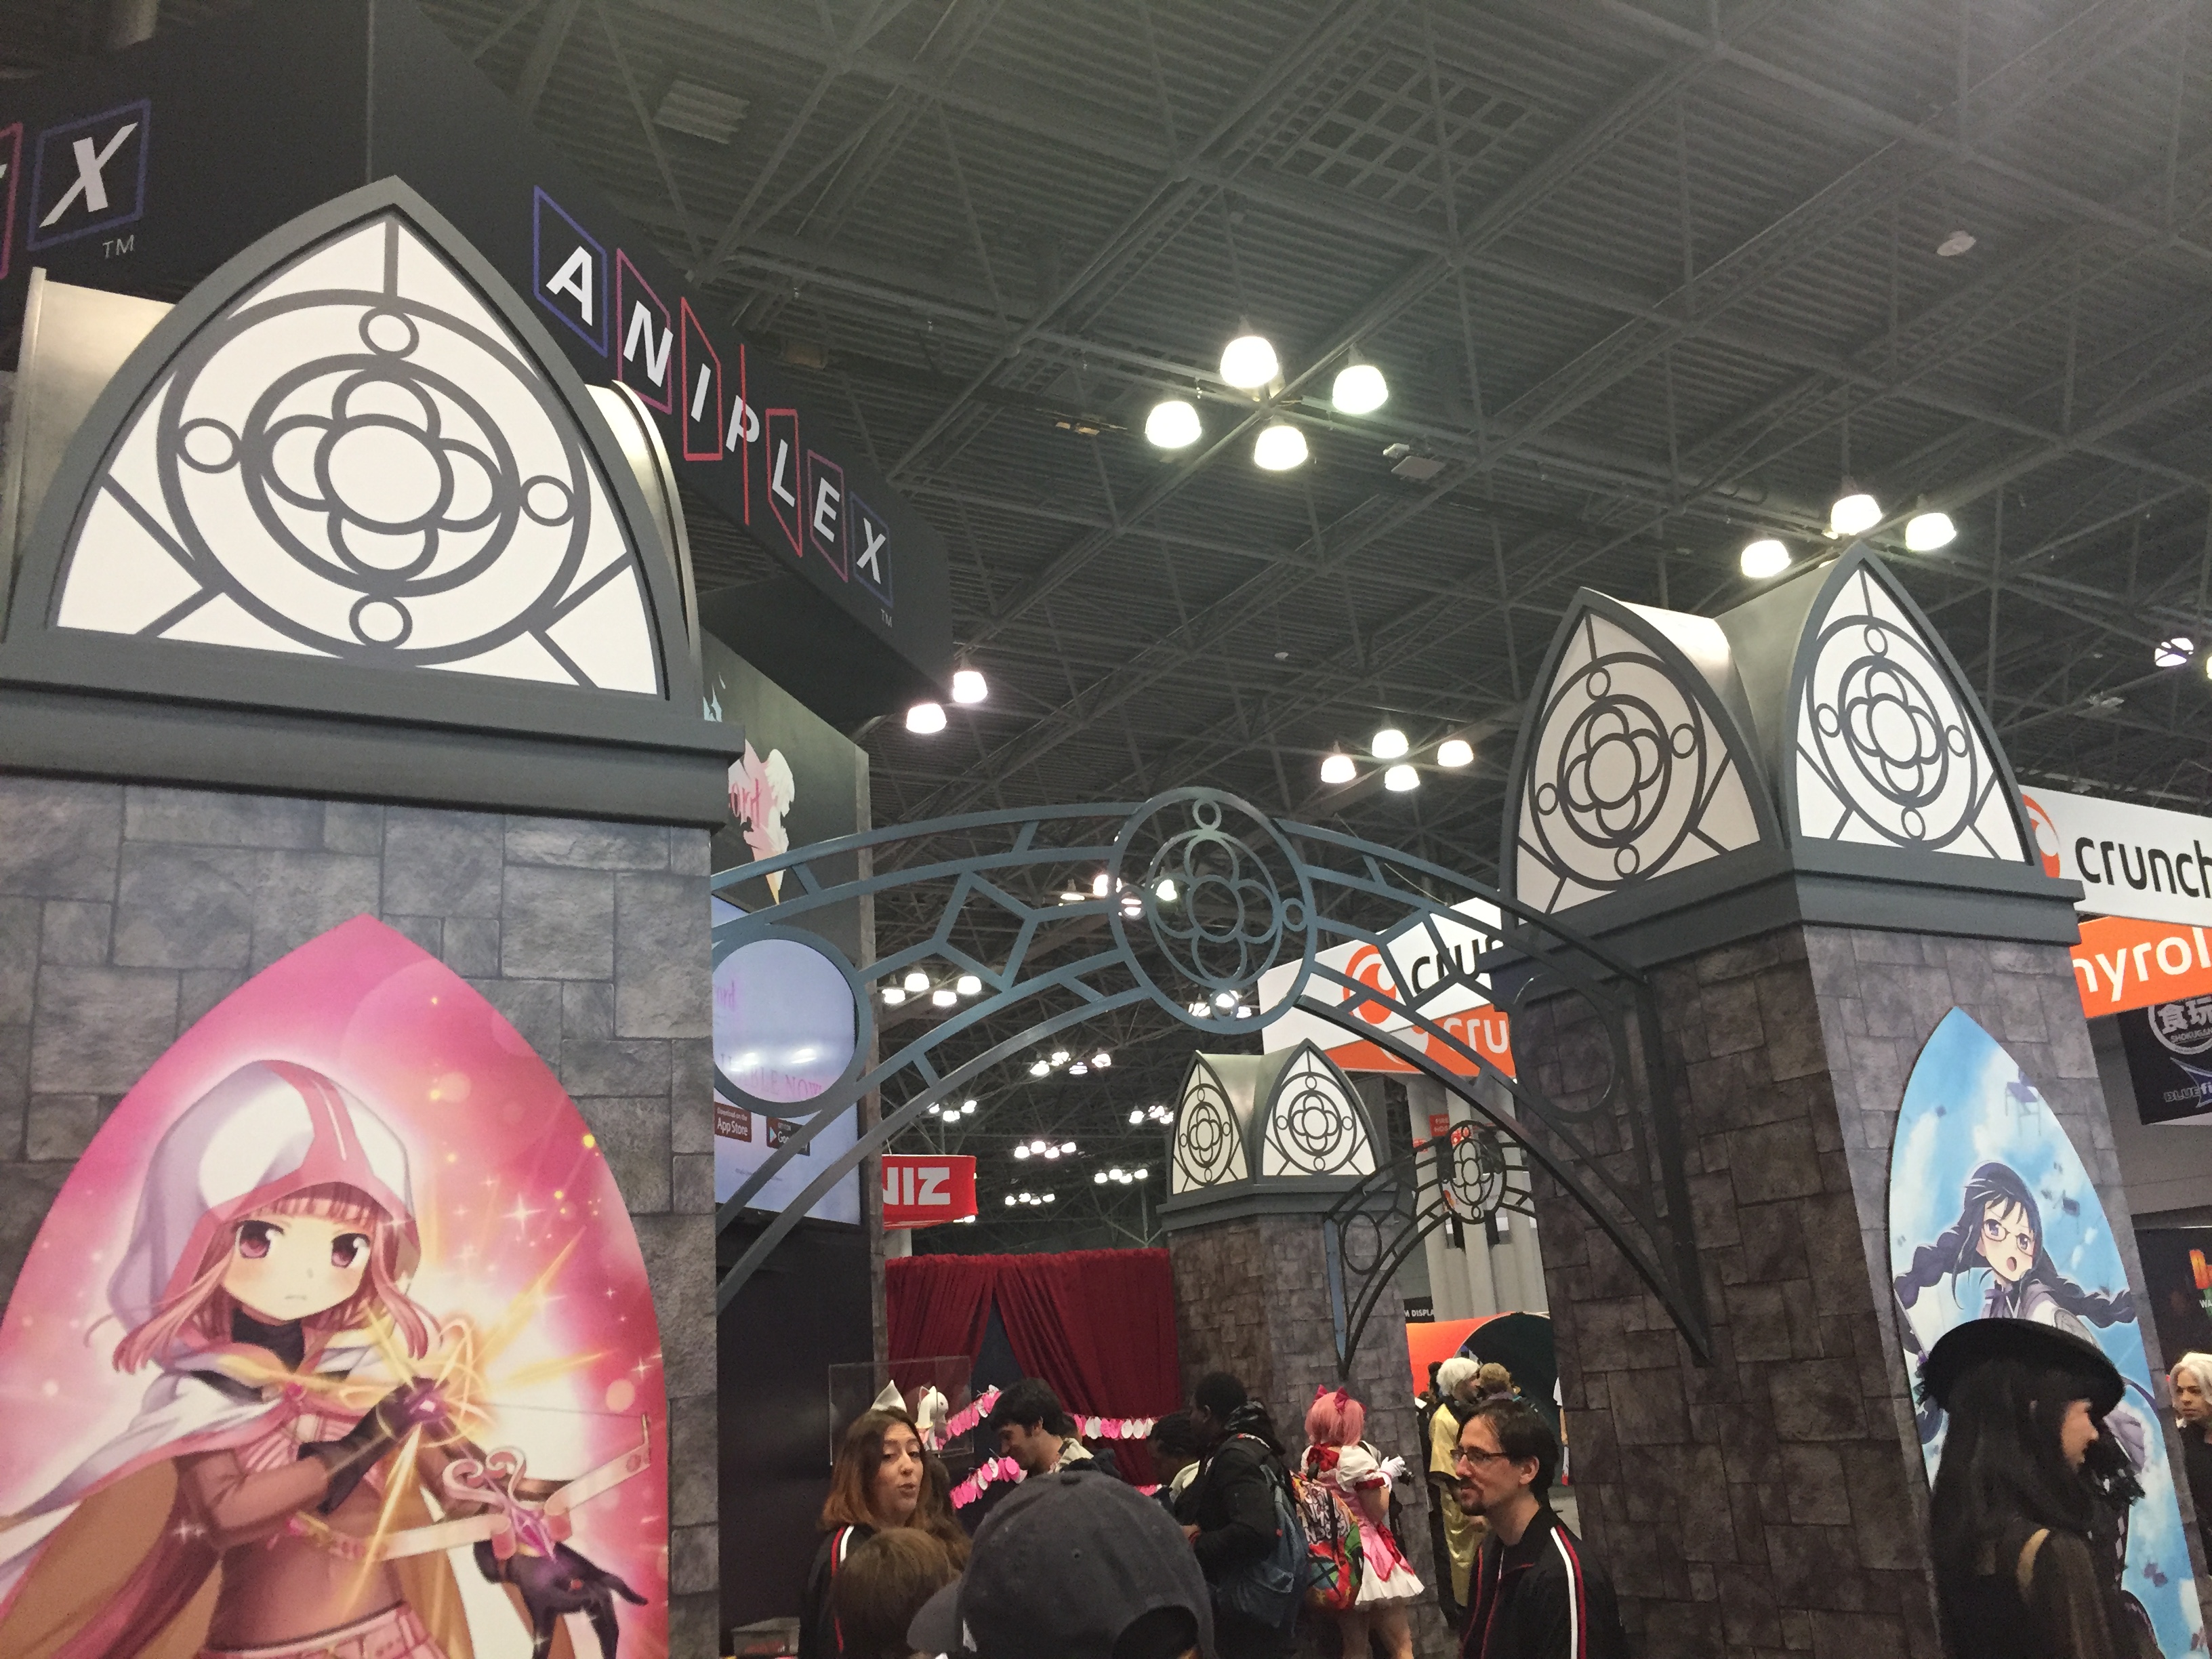 One of Aniplex's displays at AnimeNYC '19